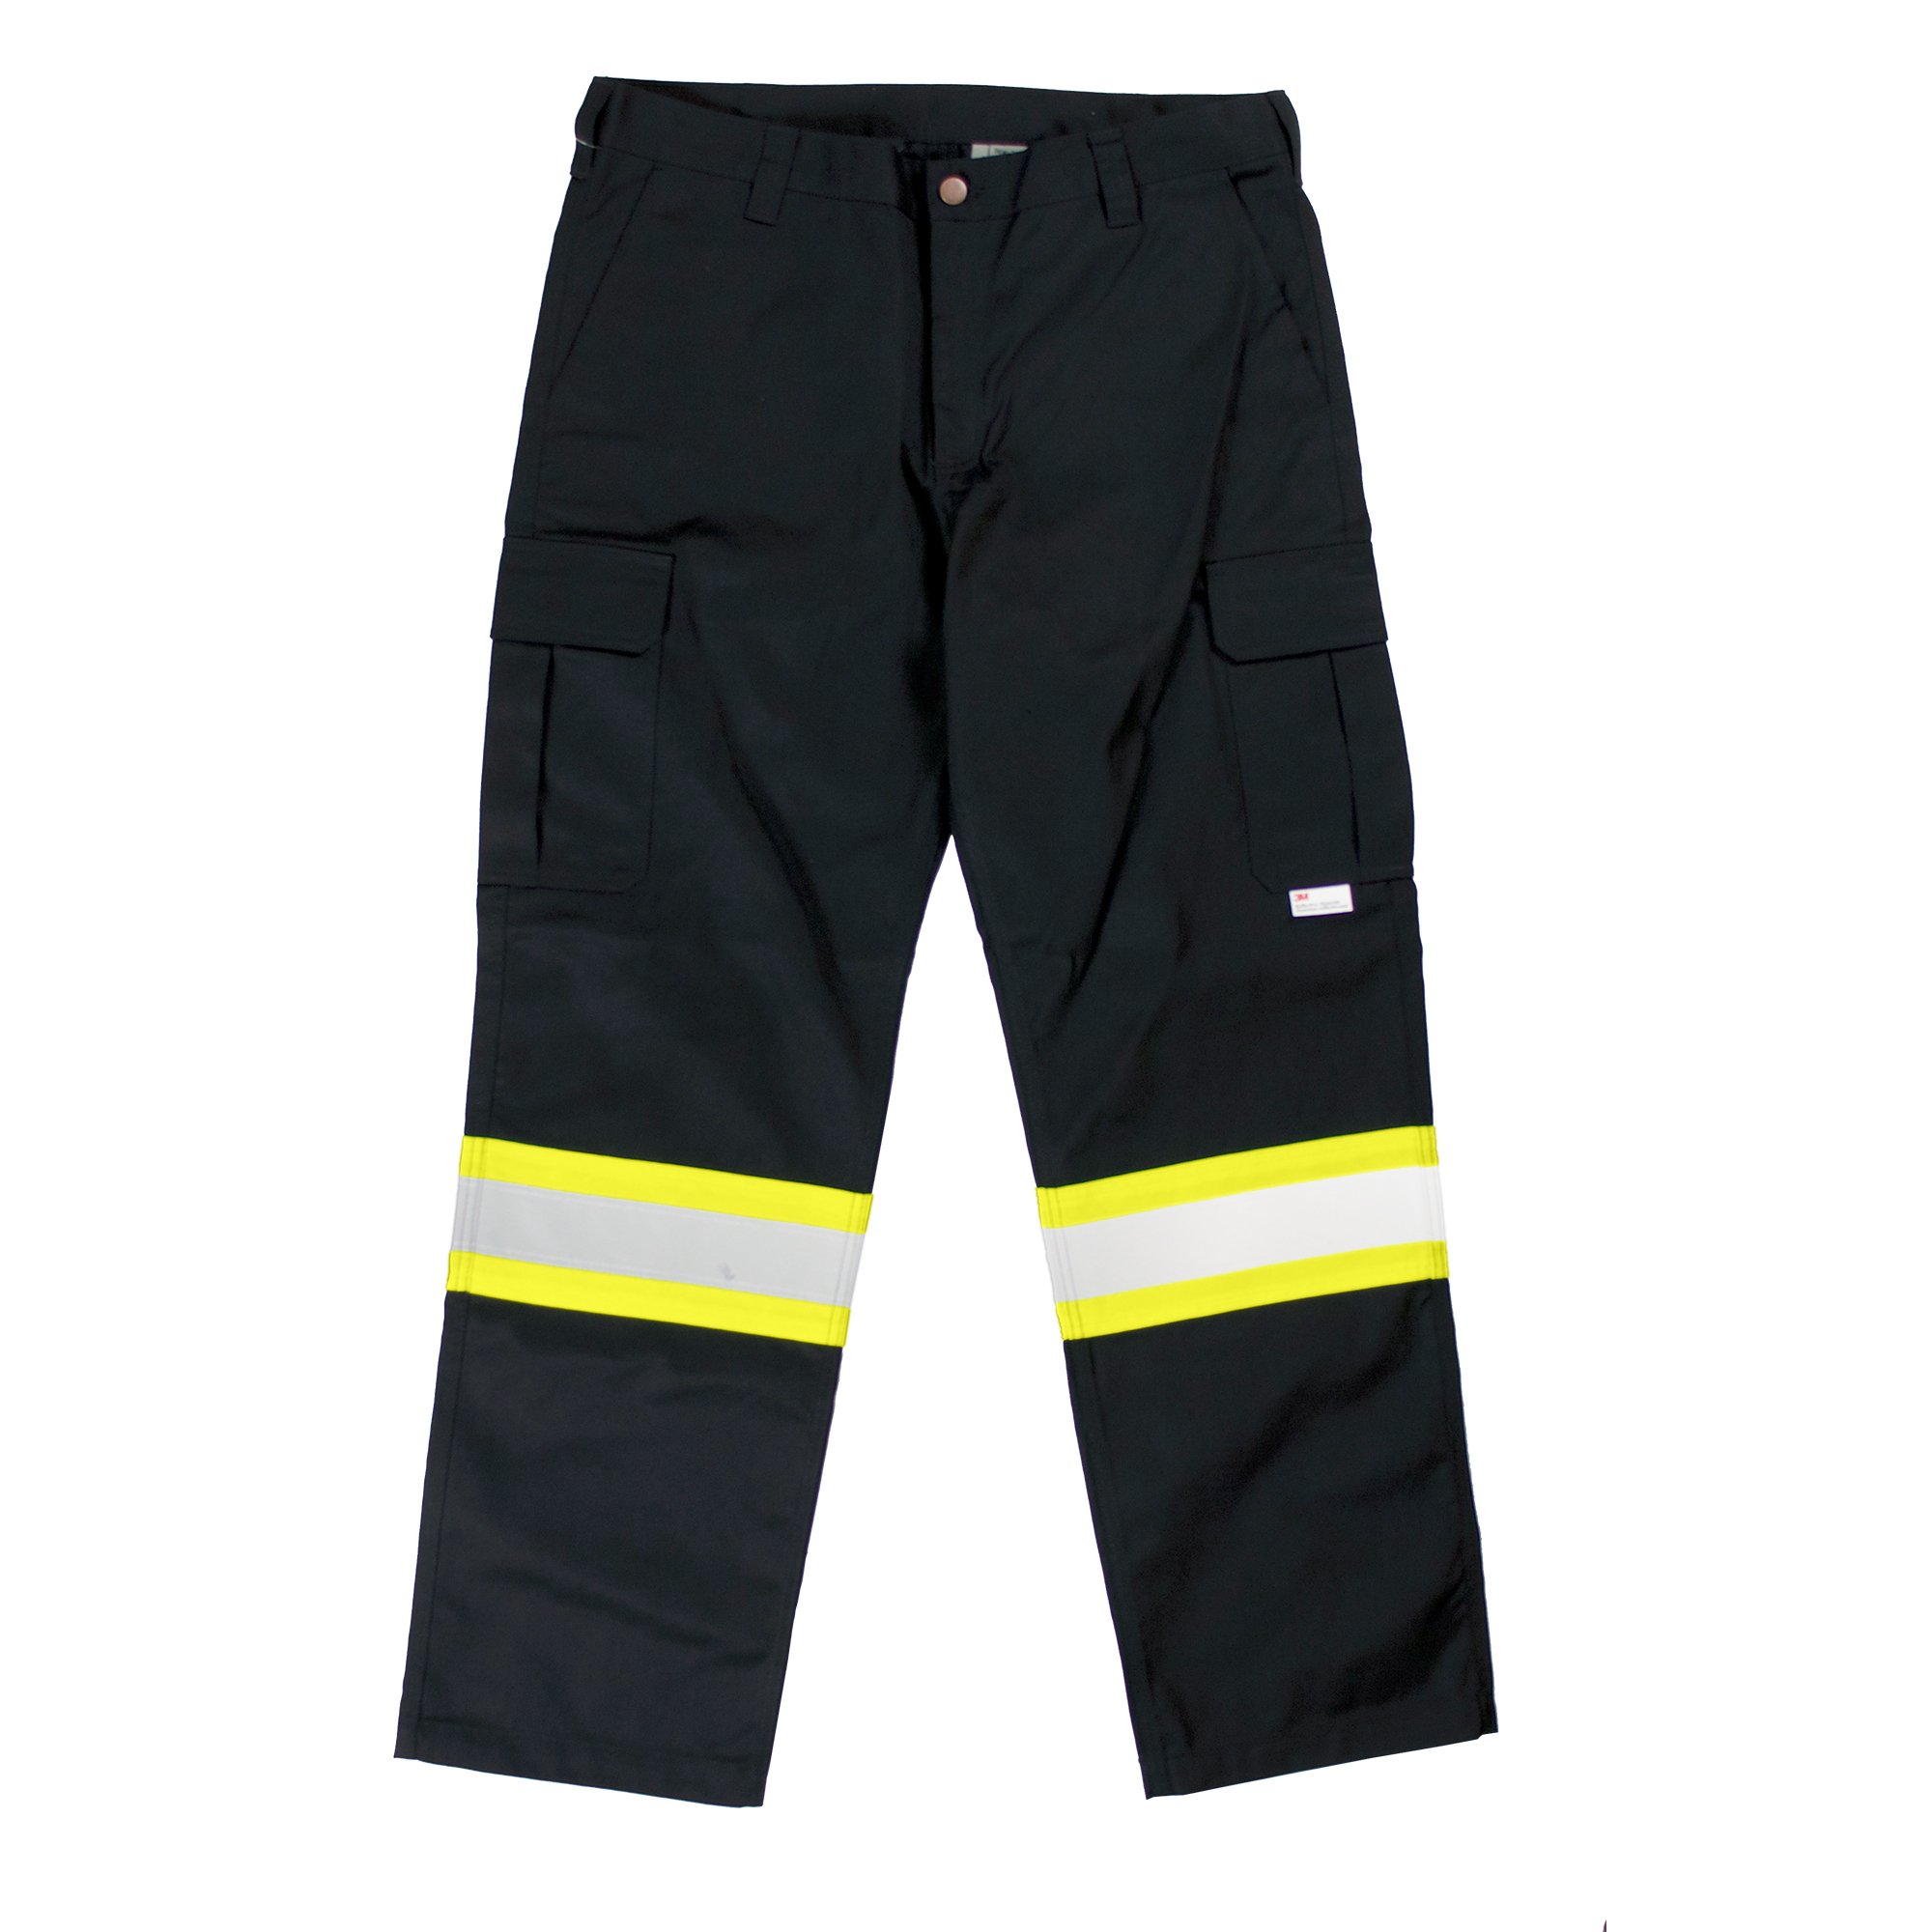 Tough Duck, Safety Cargo Utility Pant, Waist 34 in, Inseam 34 in, Color Black, Model S60741